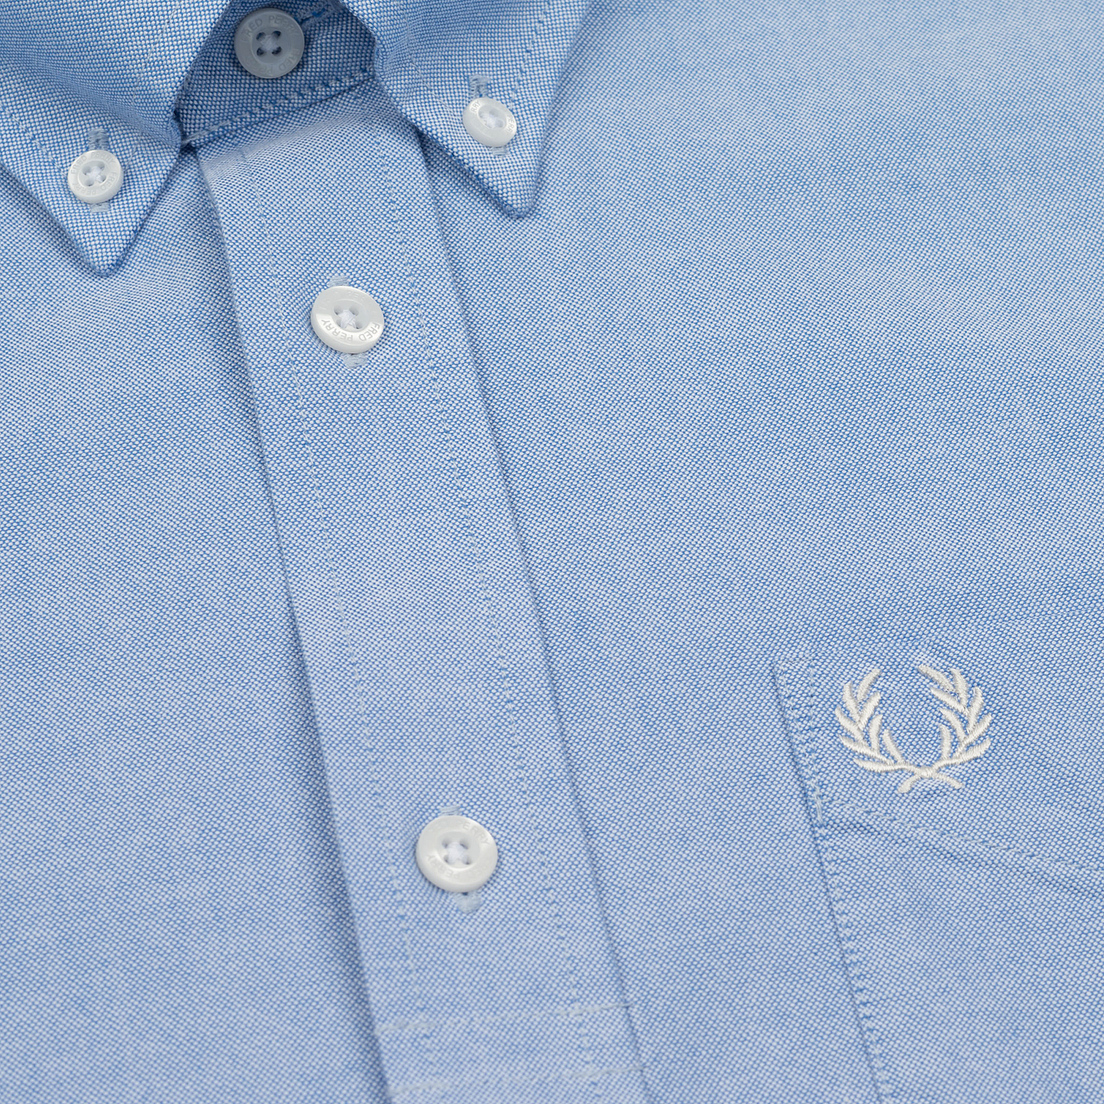 Fred Perry Мужская рубашка Classic Oxford